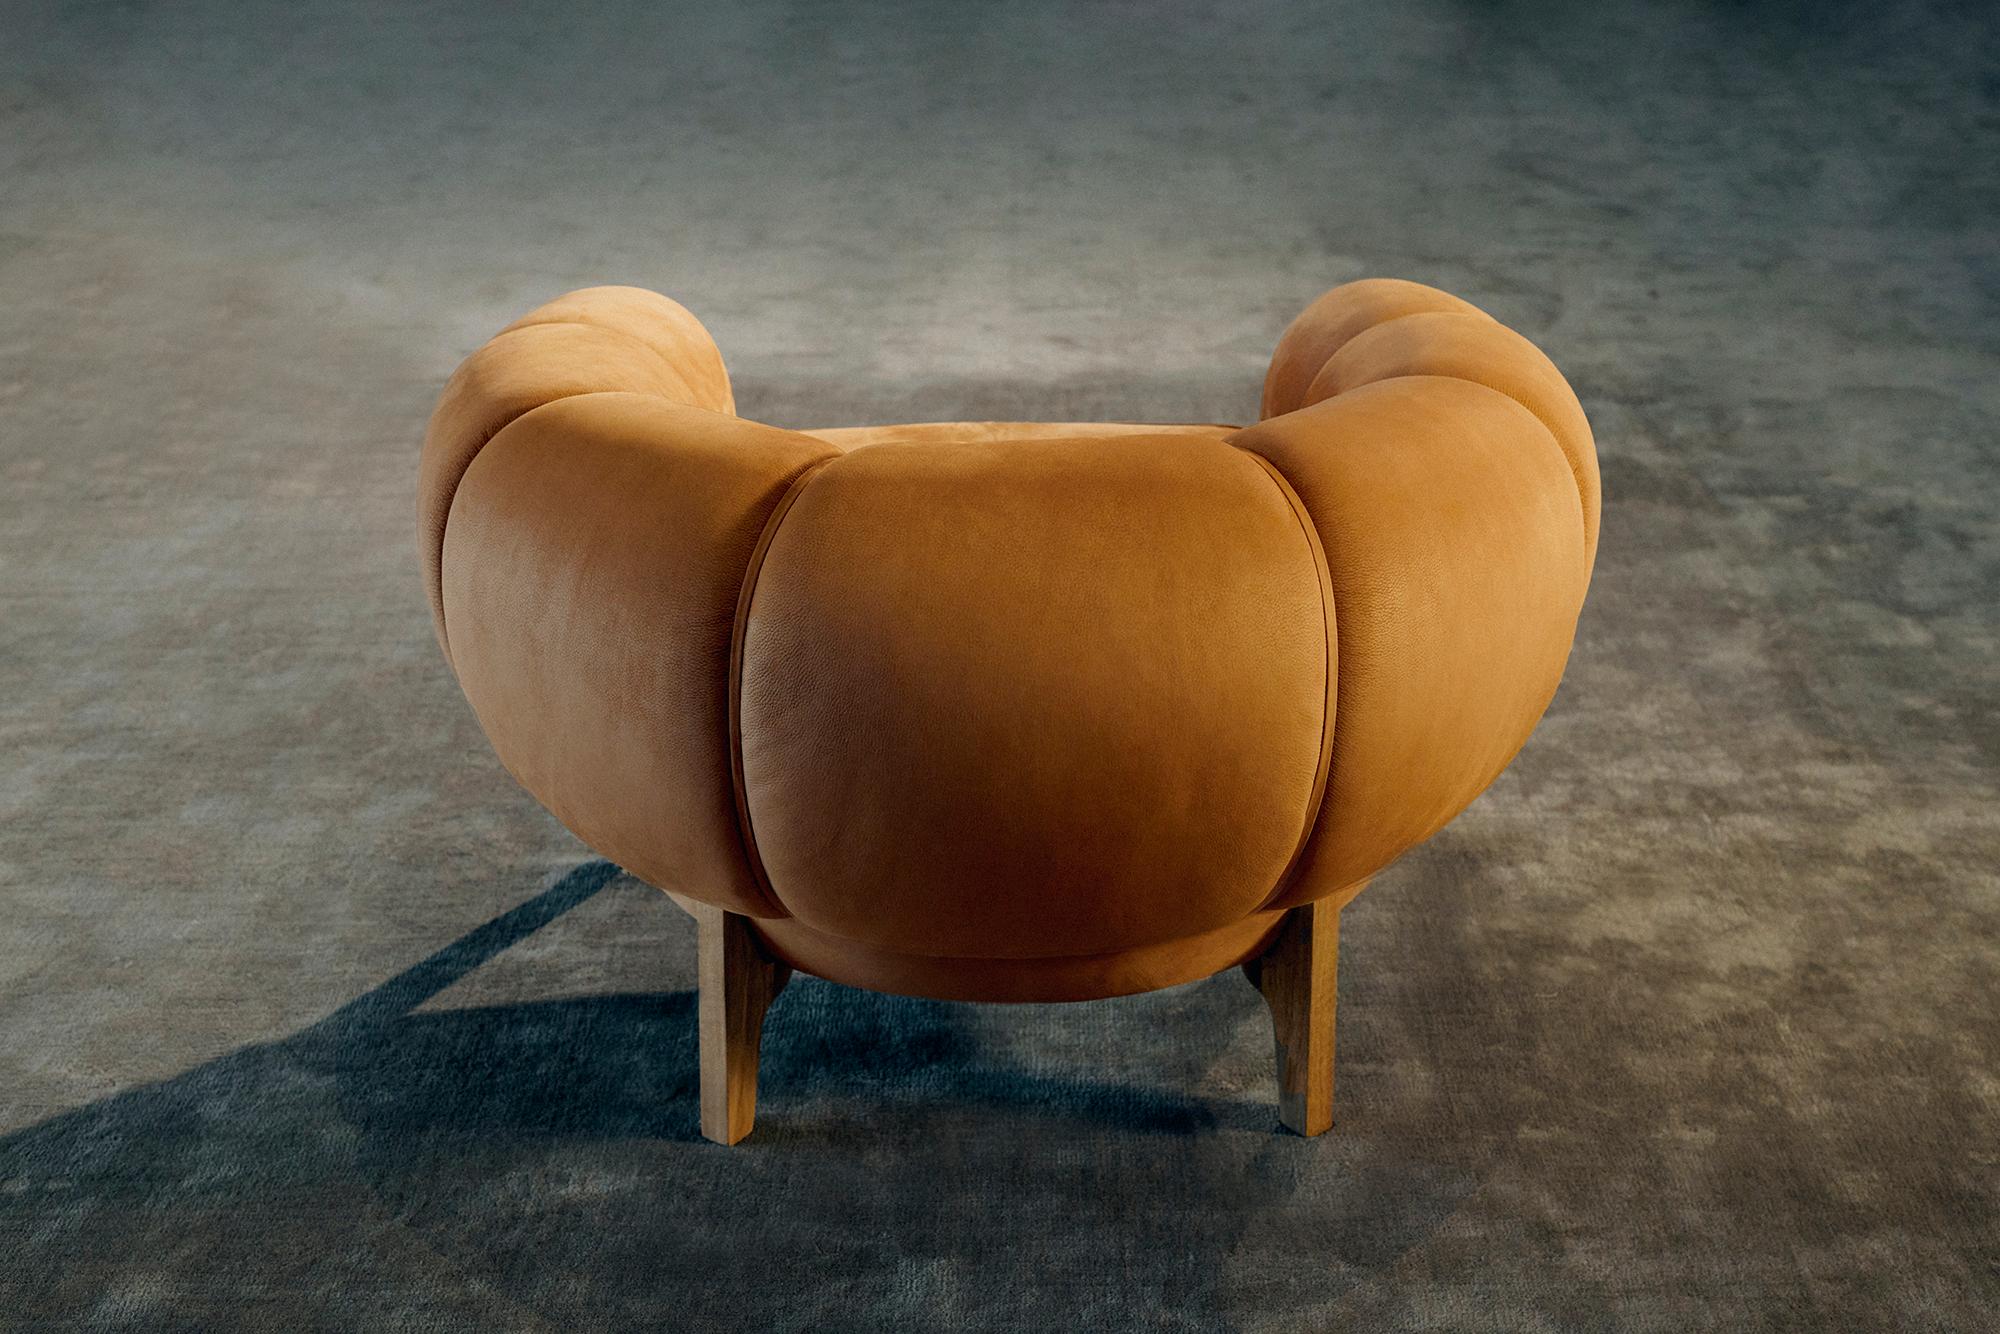 Leather 'Croissant' Lounge Chair by Illum Wikkelsø for Gubi In New Condition For Sale In Glendale, CA